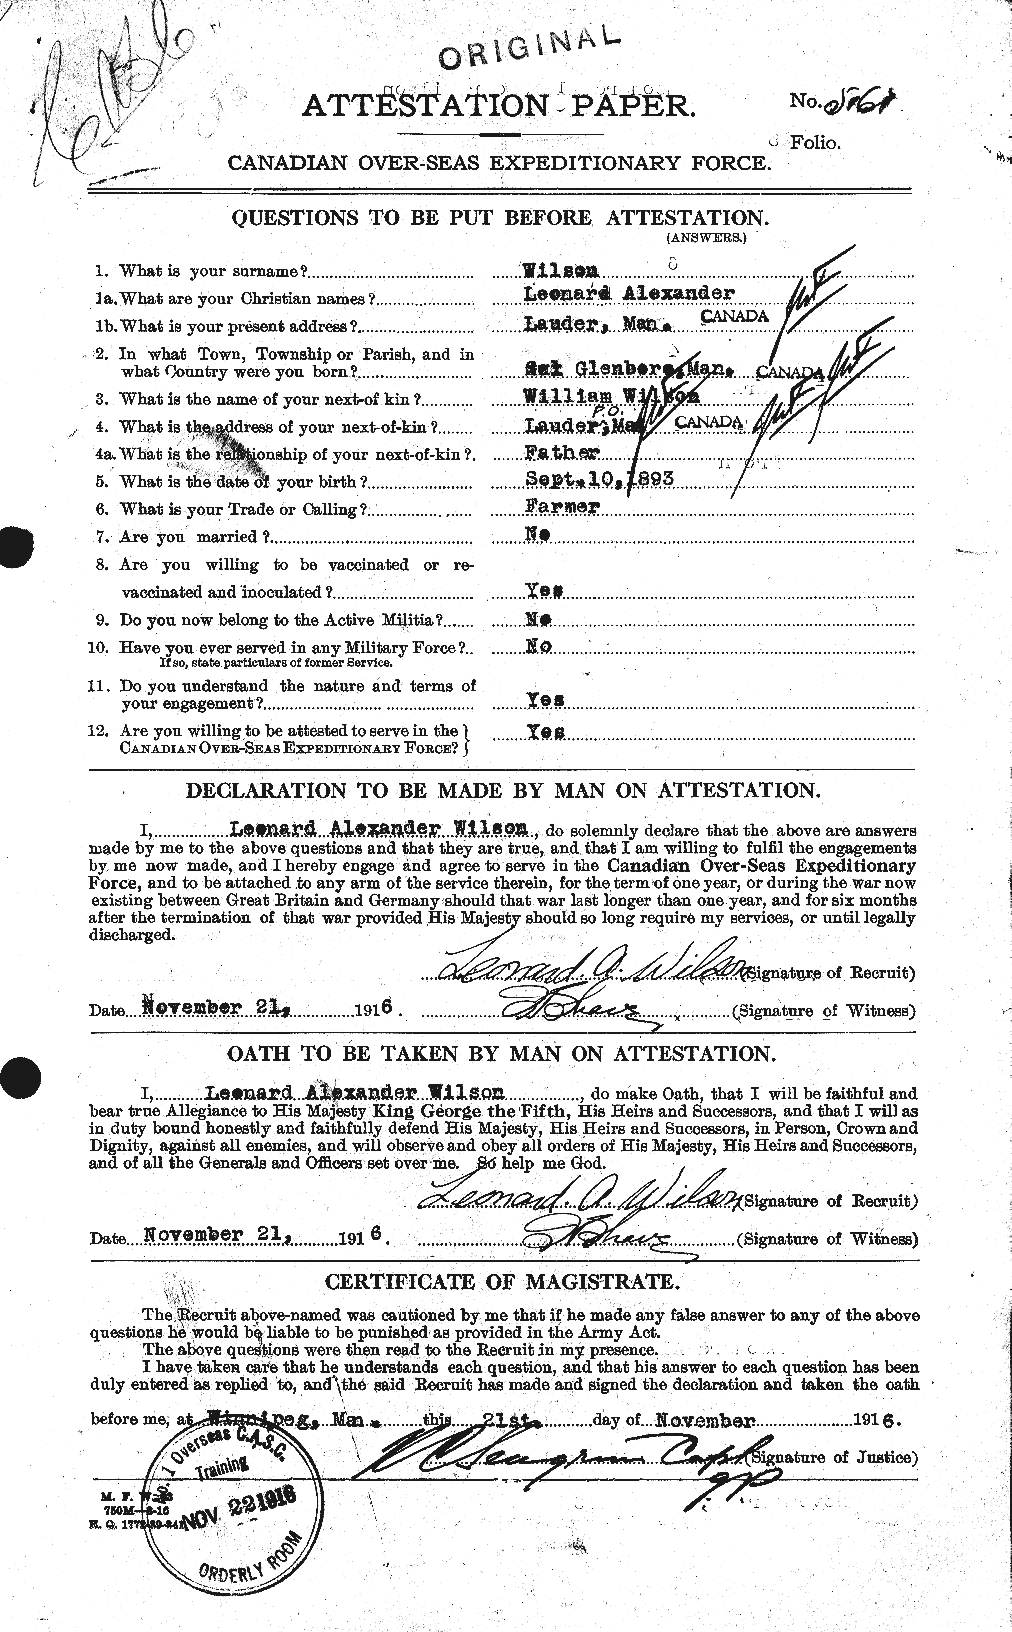 Personnel Records of the First World War - CEF 678636a